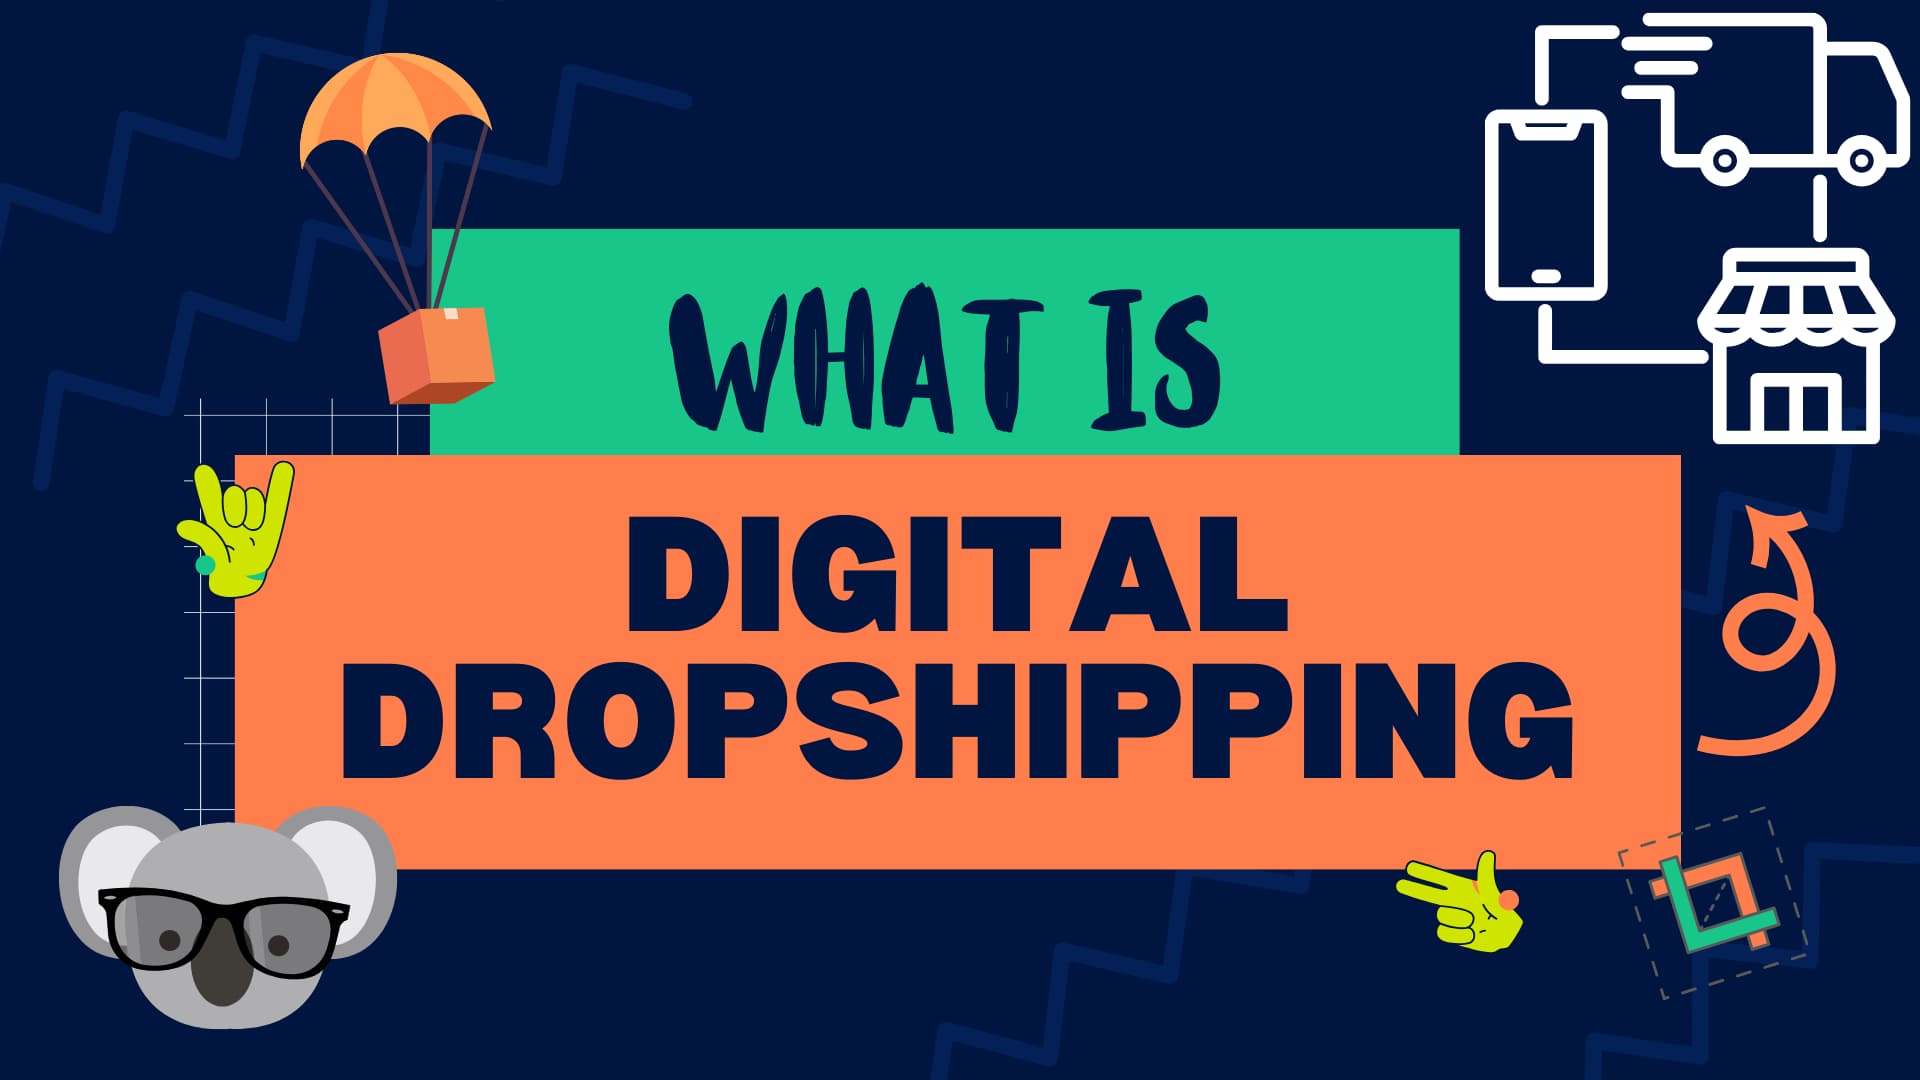 What is digital dropshipping with koala branding